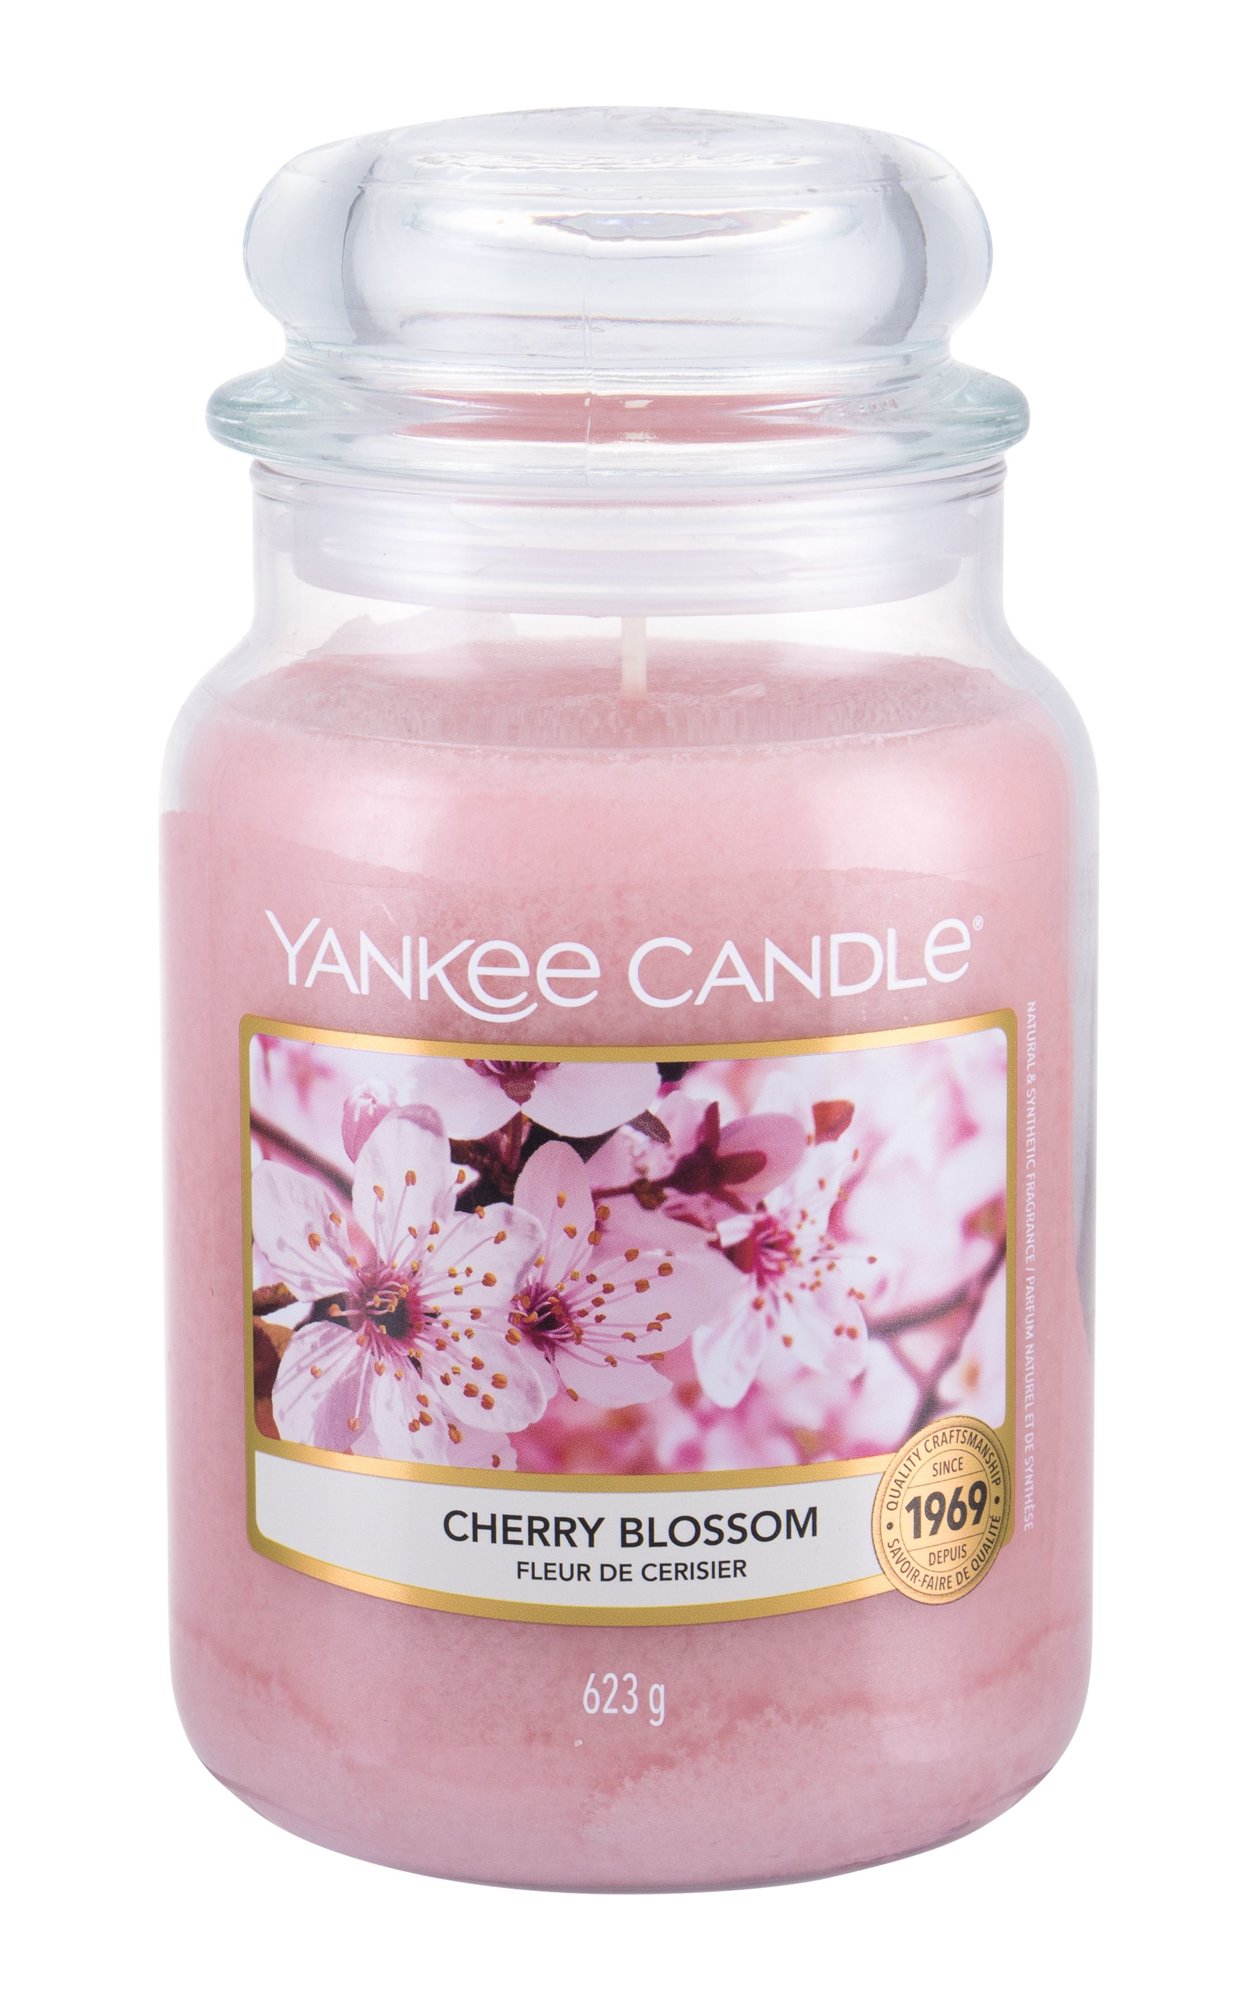 Yankee Candle Cherry Blossom